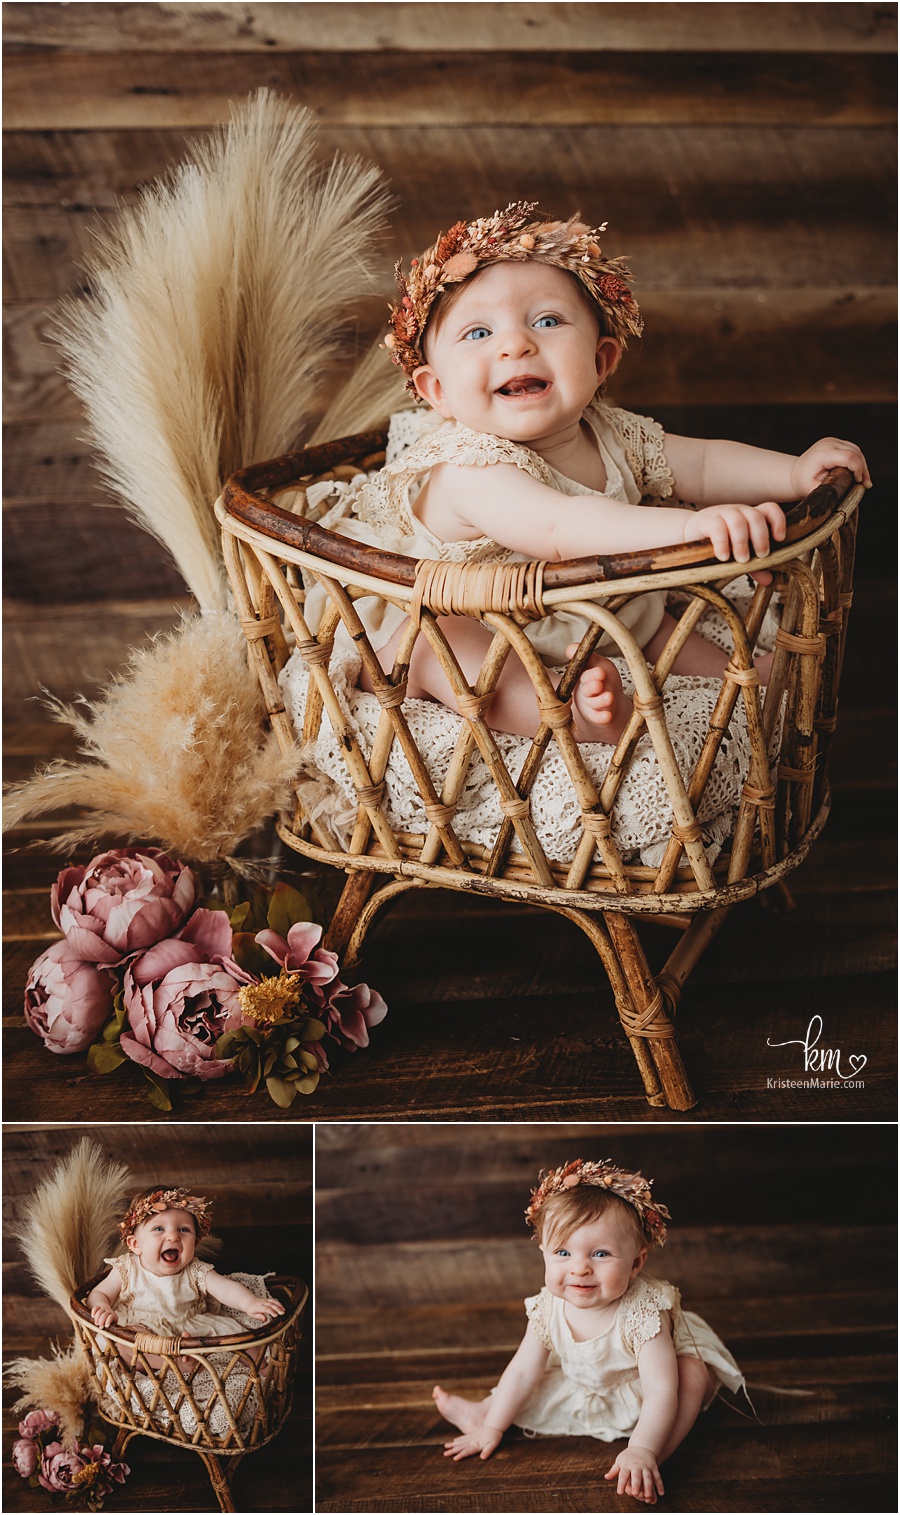 Boho girl in basket with floral headband - Indianapolis photography by KristeenMarie